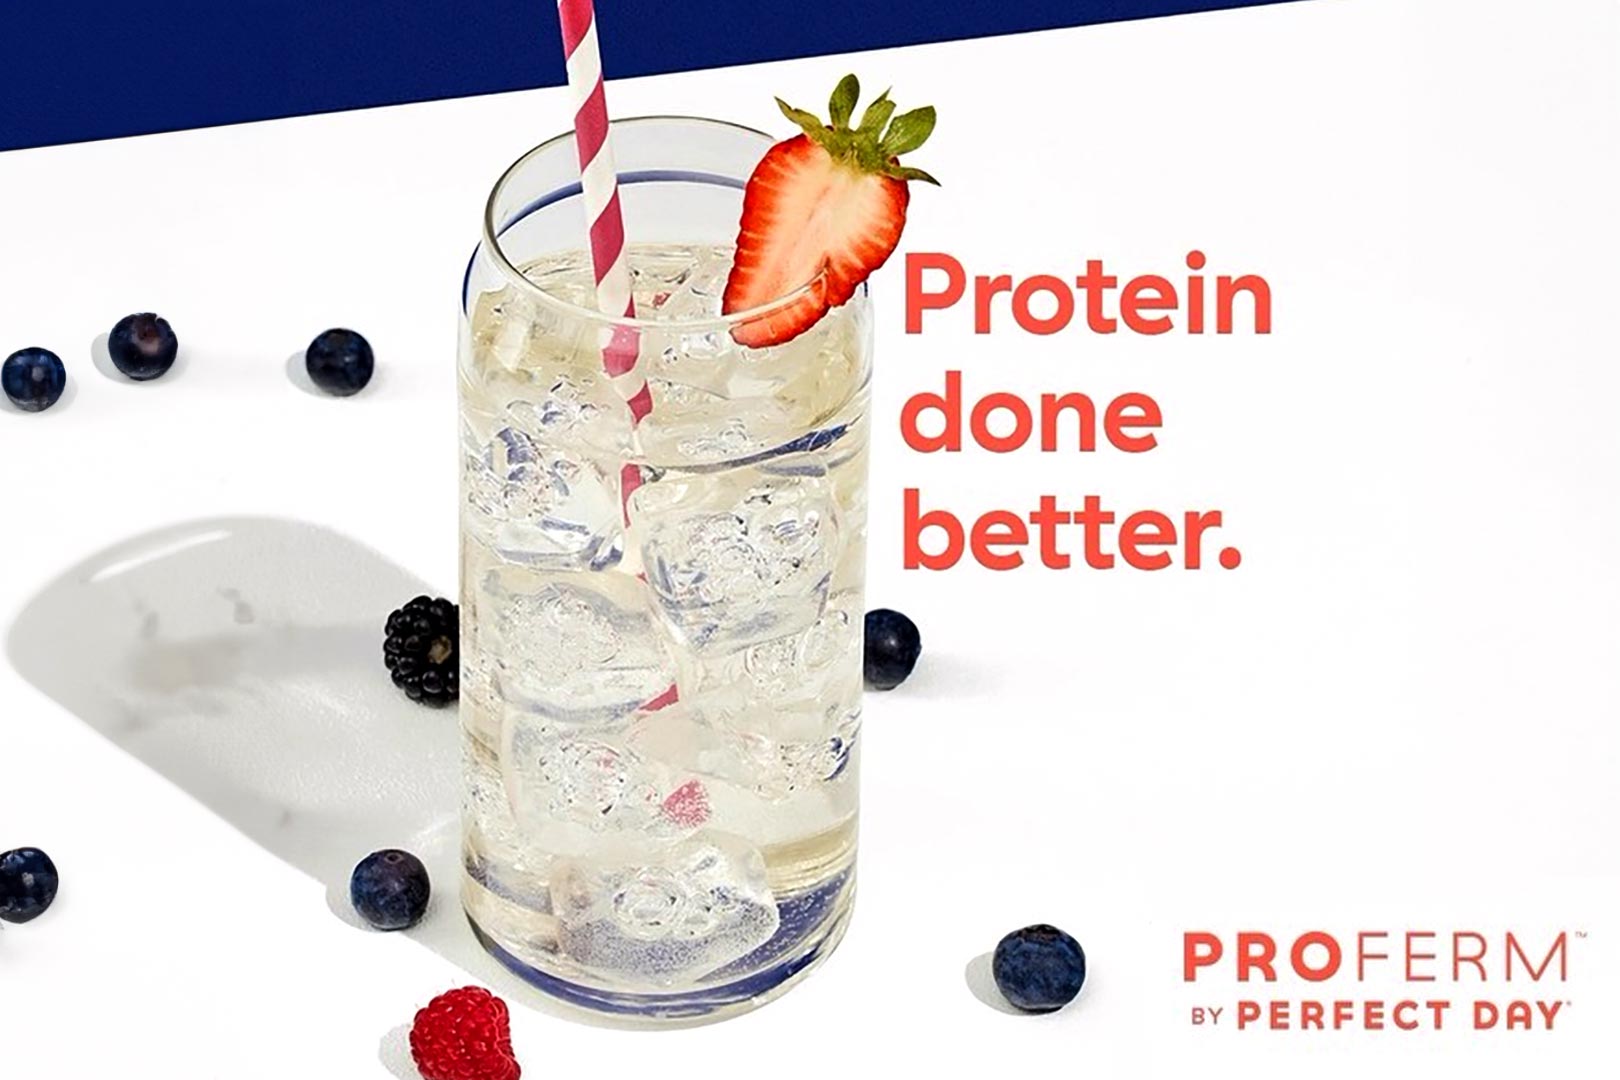 Perfect Day Animal Free Whey Protein Named Proferm